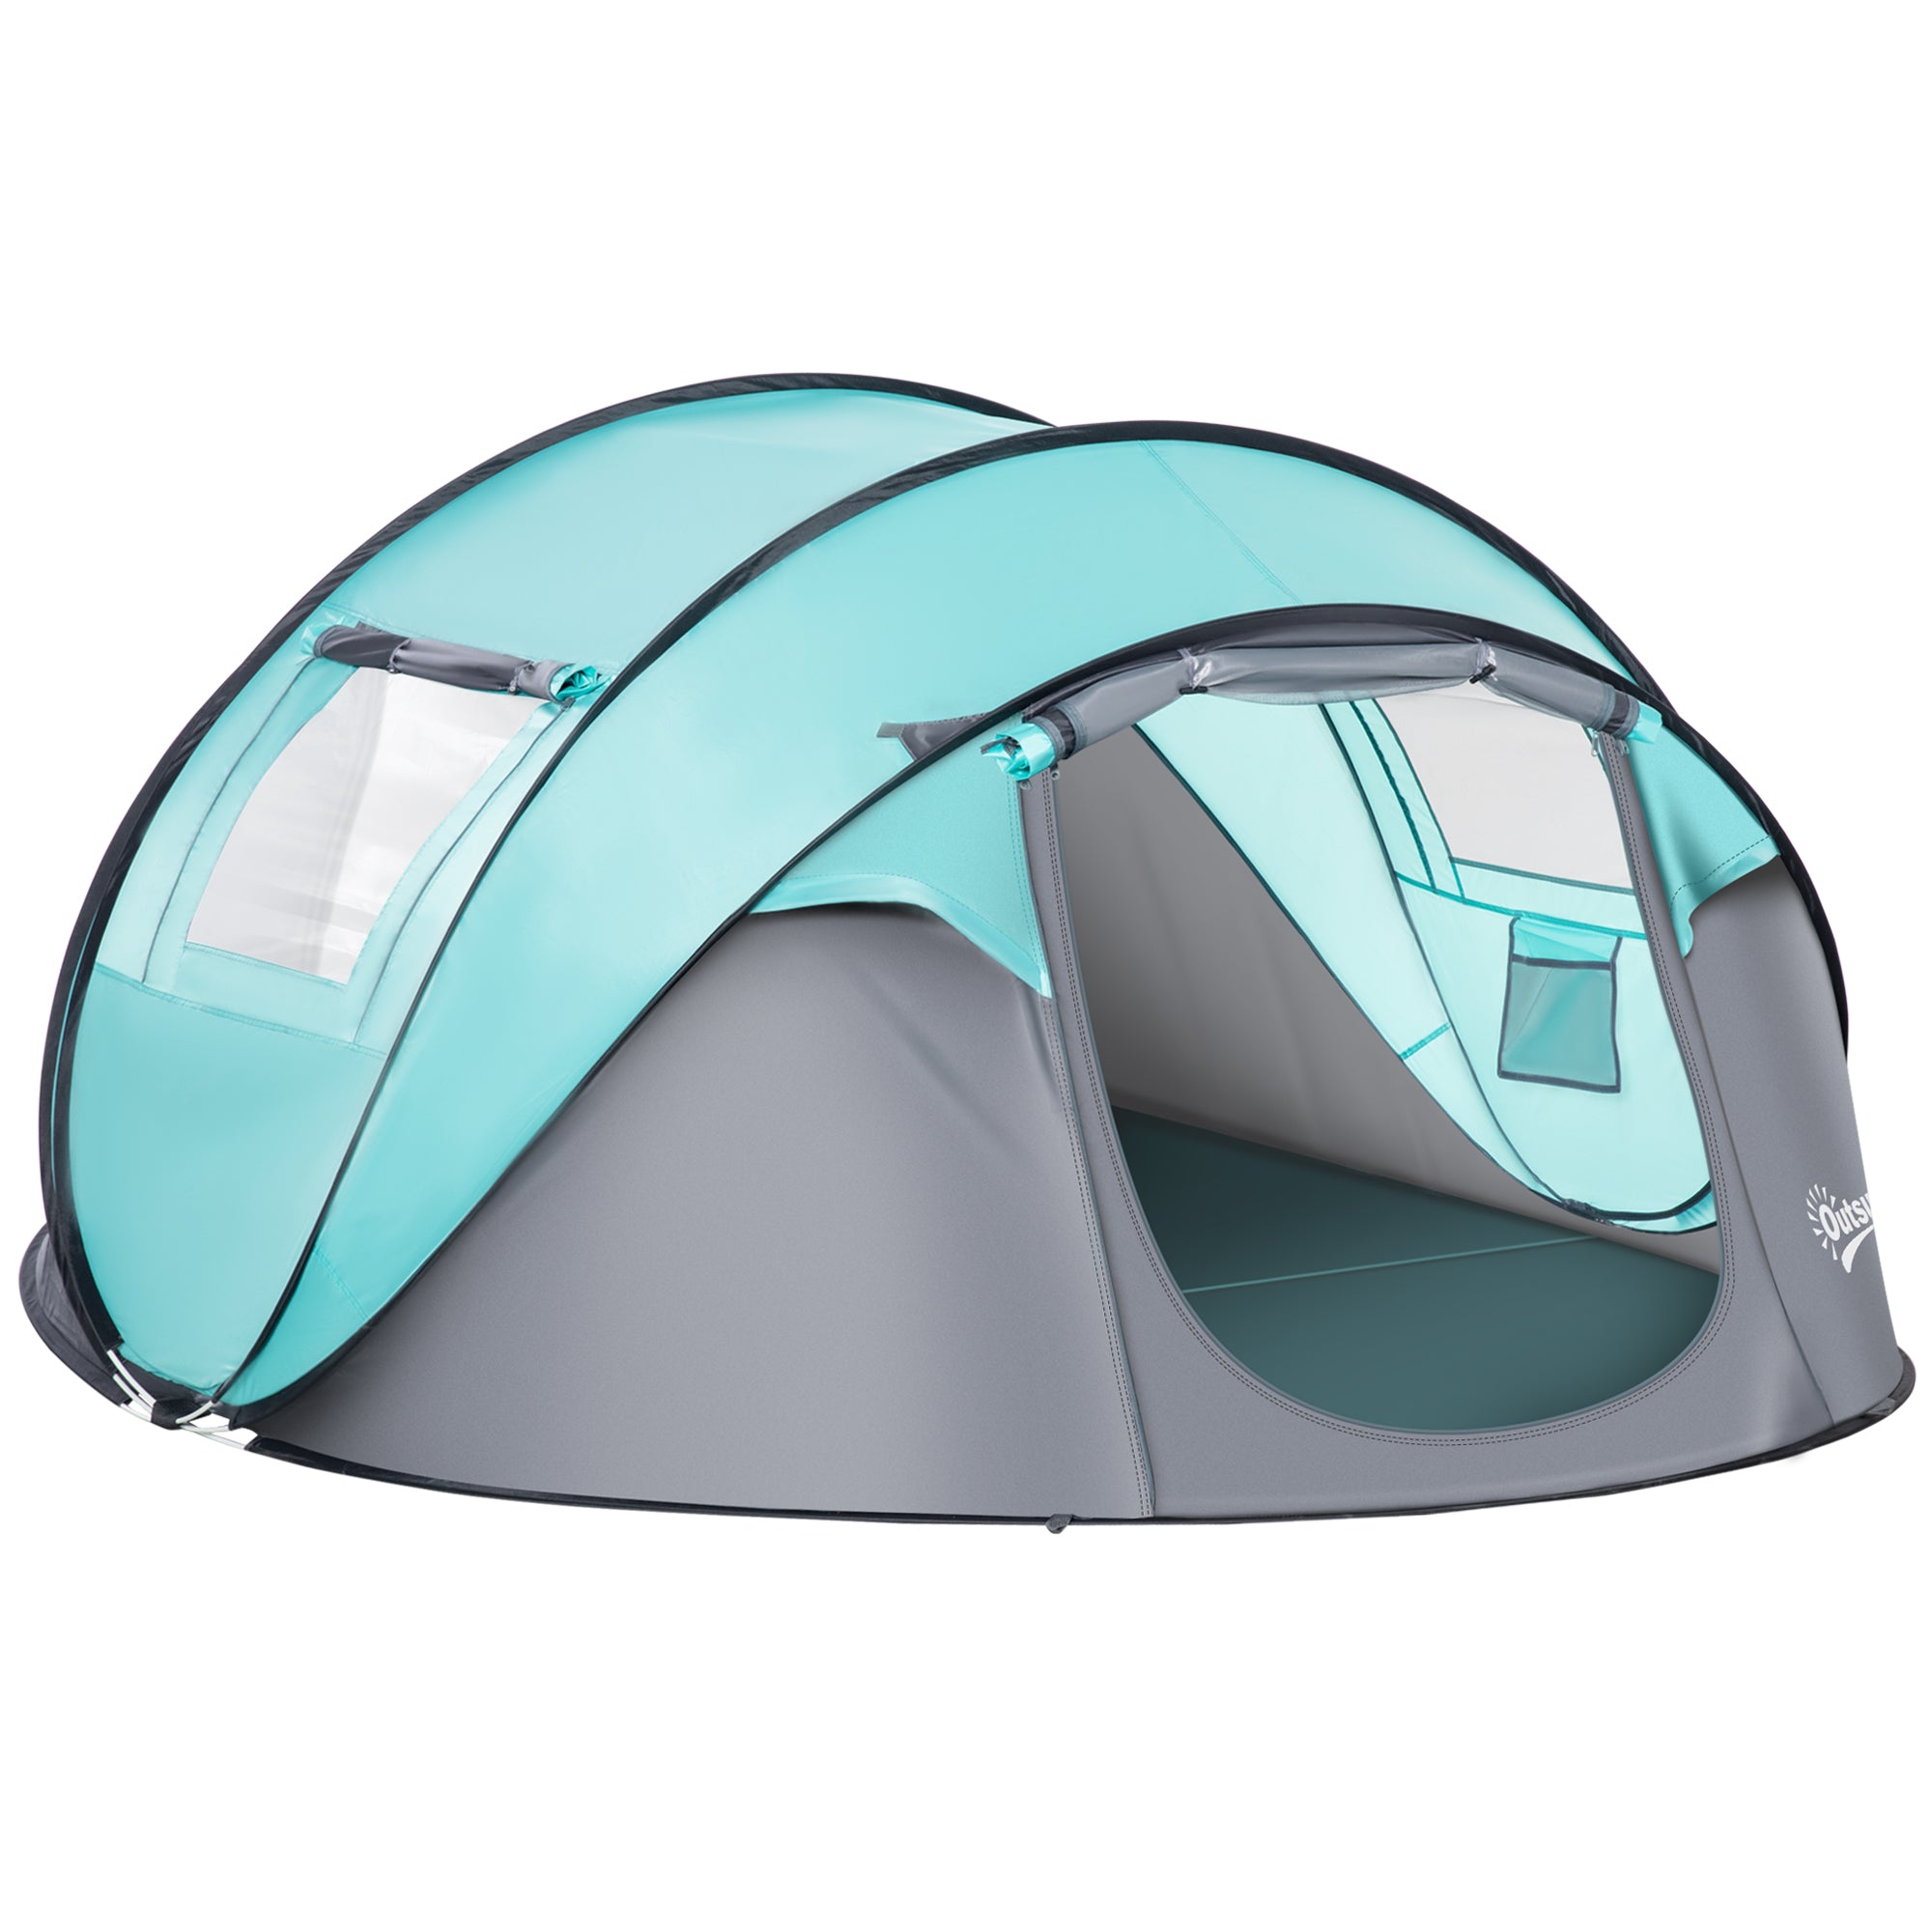 Outsunny 4 Person Camping Tent Pop-up Design w/ Mesh Vents for Hiking Dark Blue  | TJ Hughes